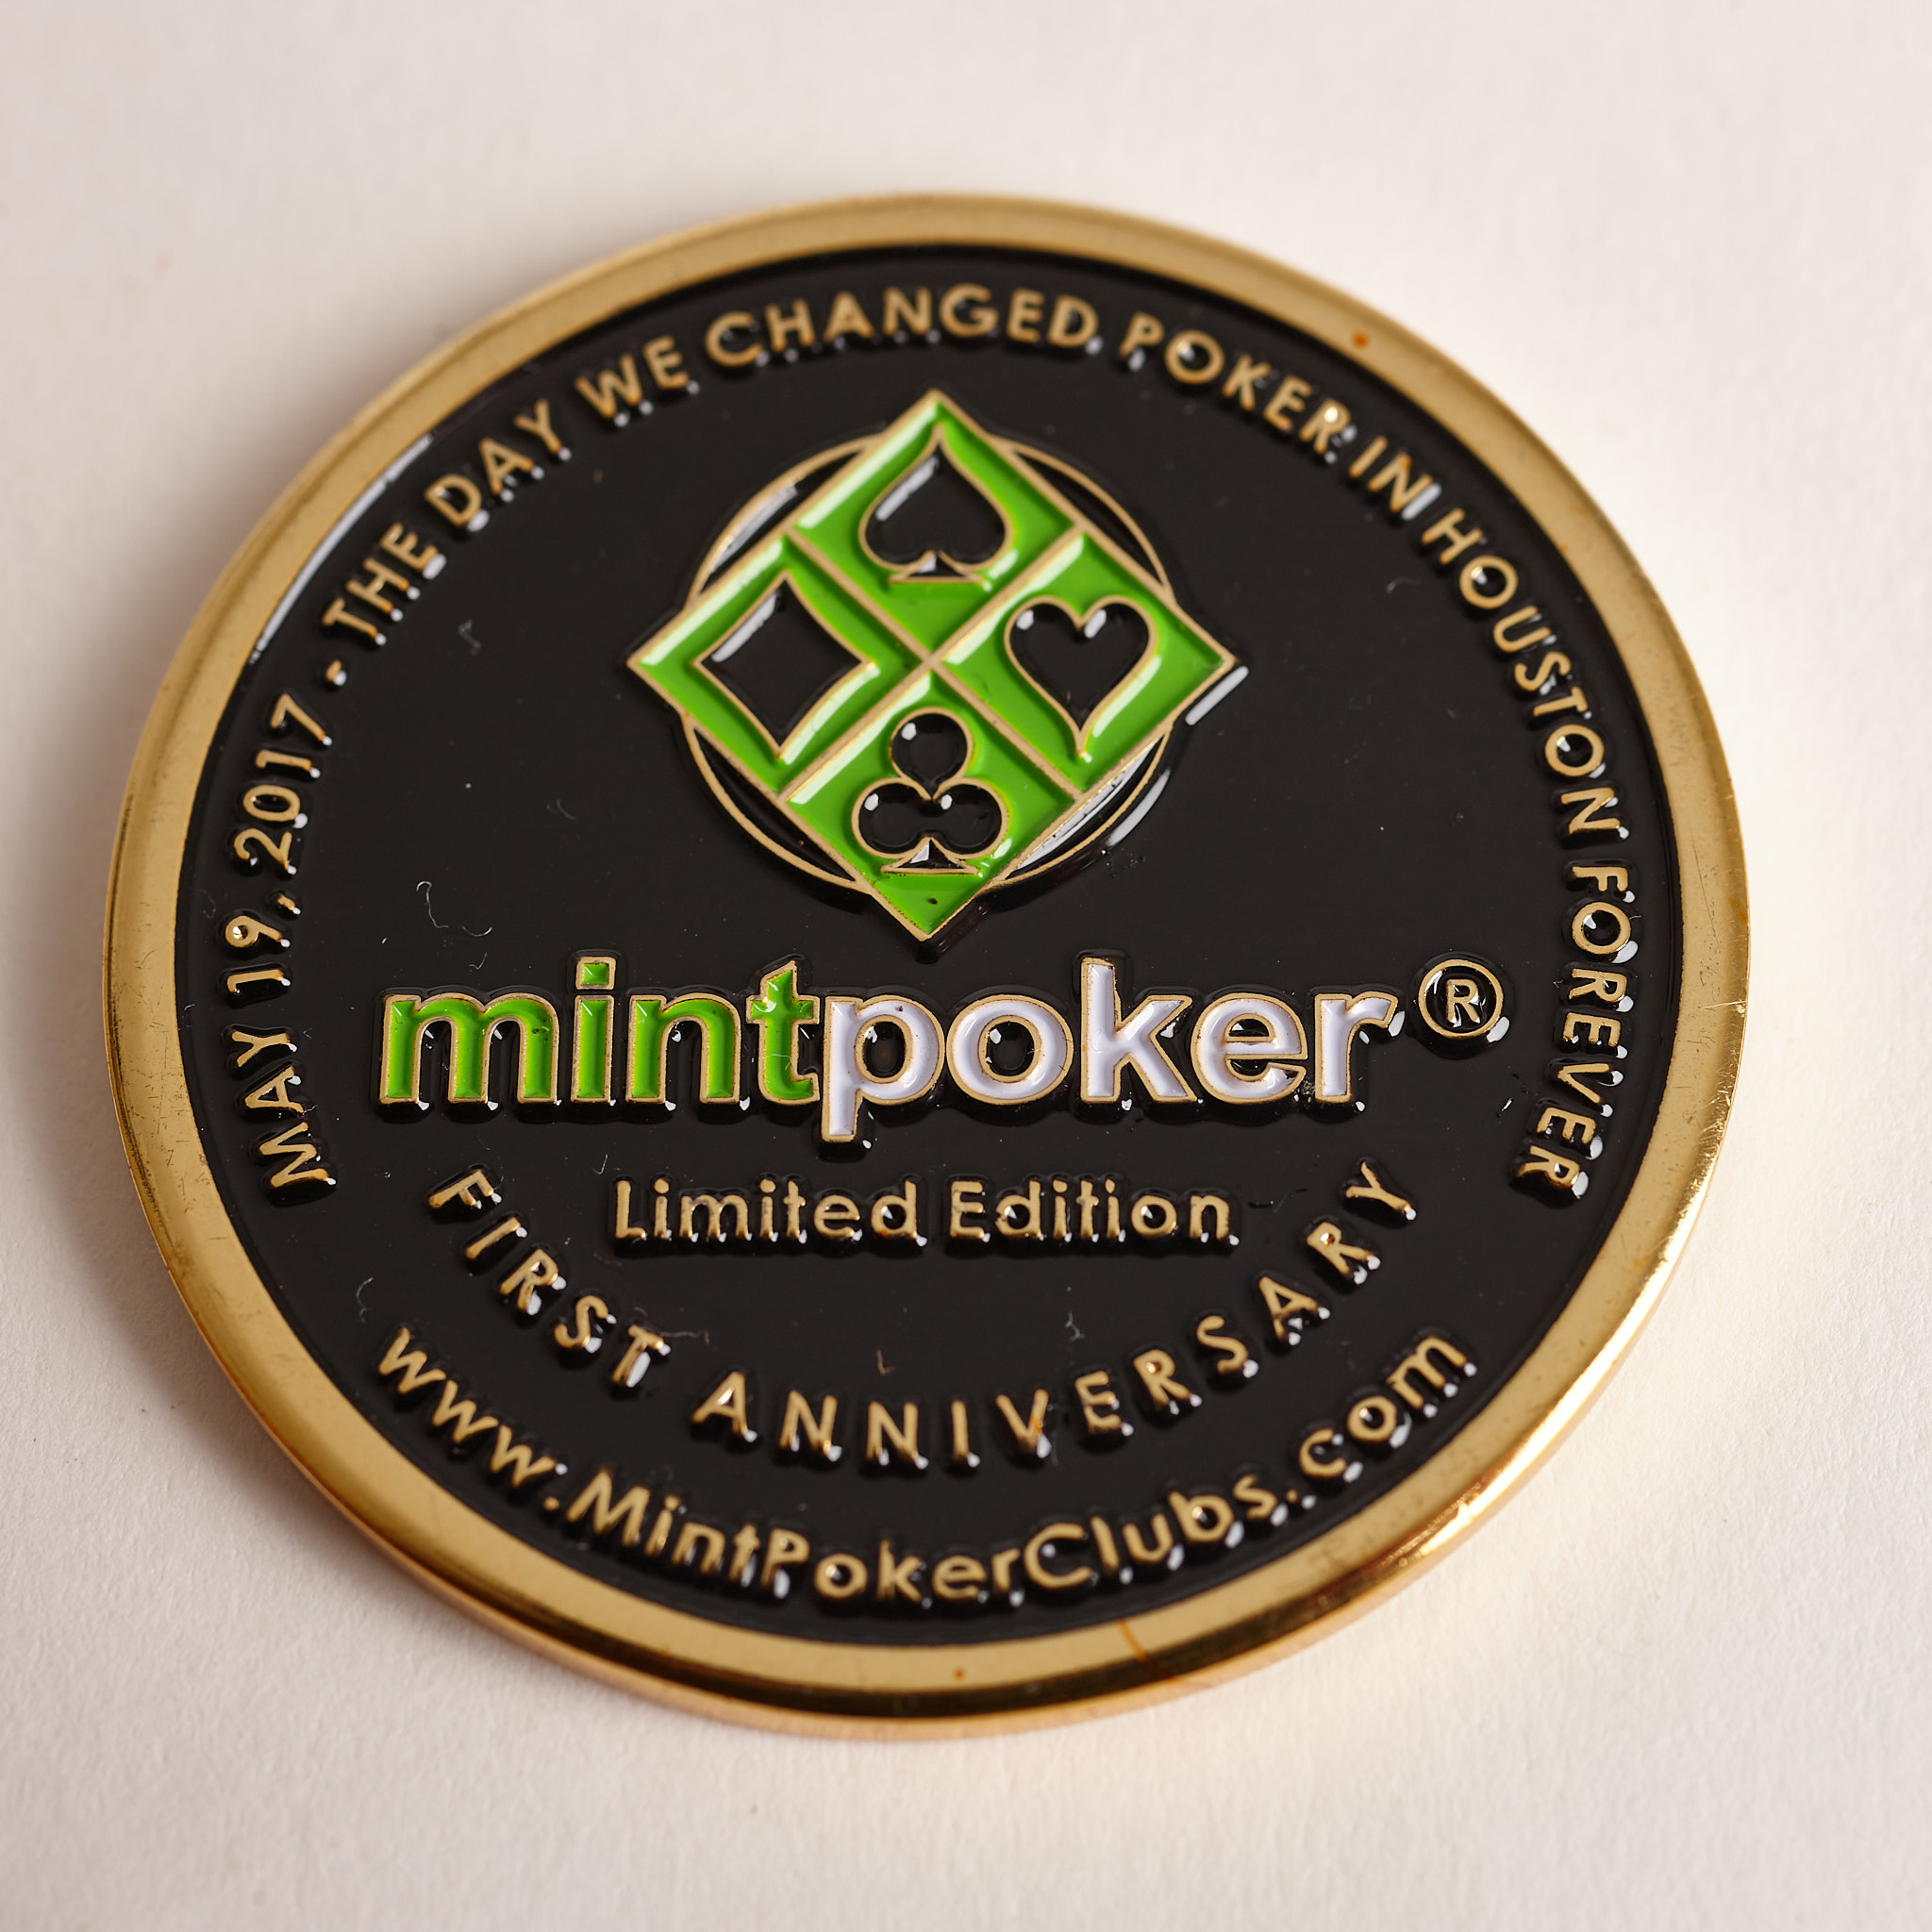 MINT POKER, FIRST ANNIVERSARY 2017, LIMITED ADDITION, Poker Card Guard